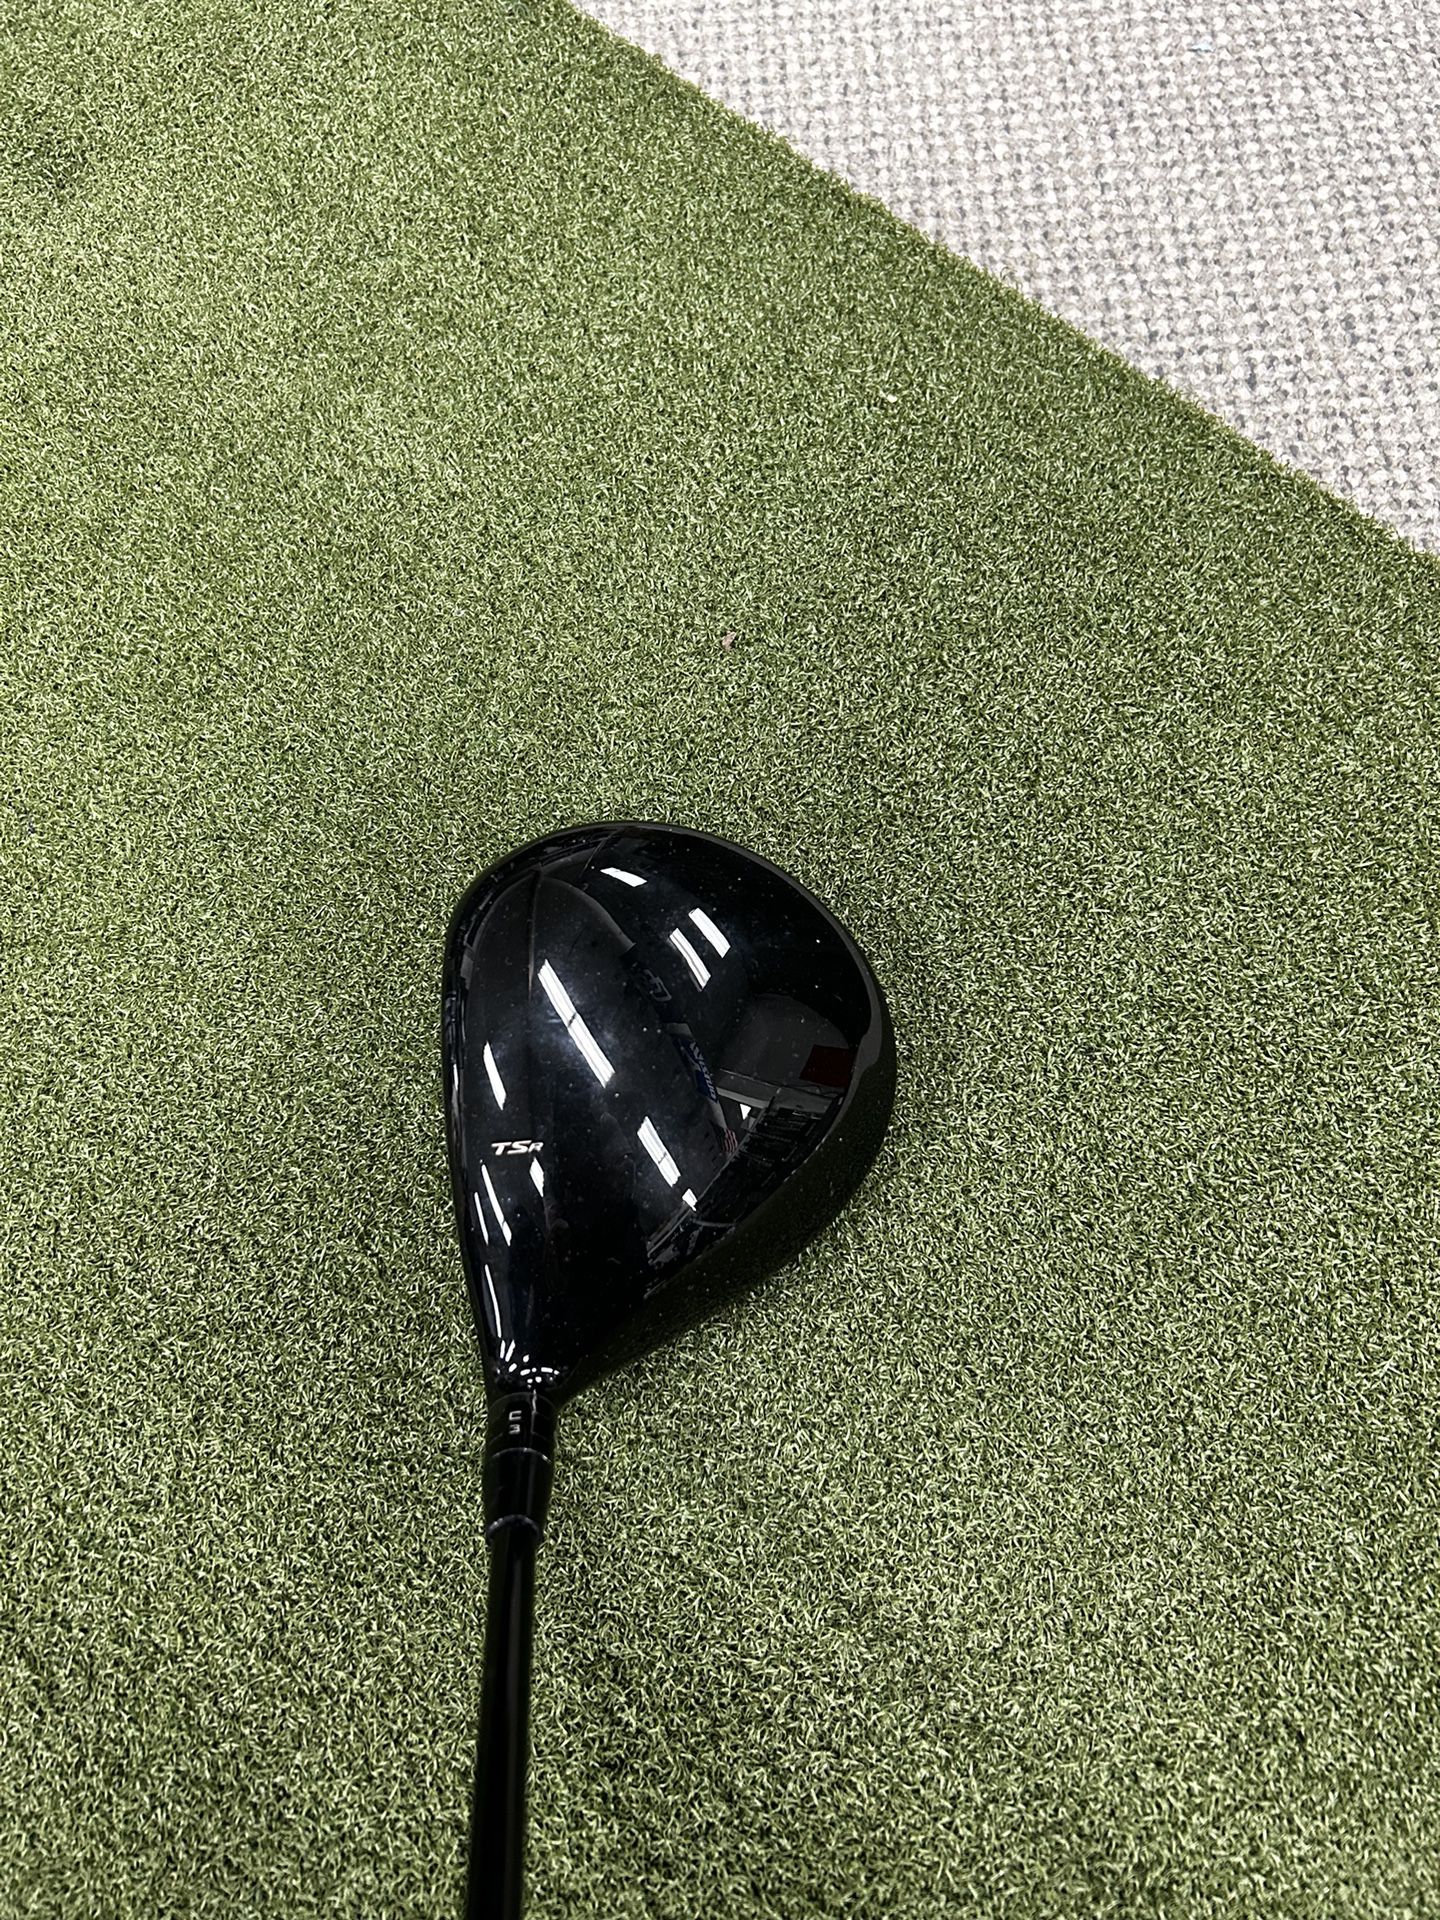 Golf Clubs For Sale: TSR4 8.0 Driver With HZRDUS Smoke Black RDX 6.0/60g Shaft